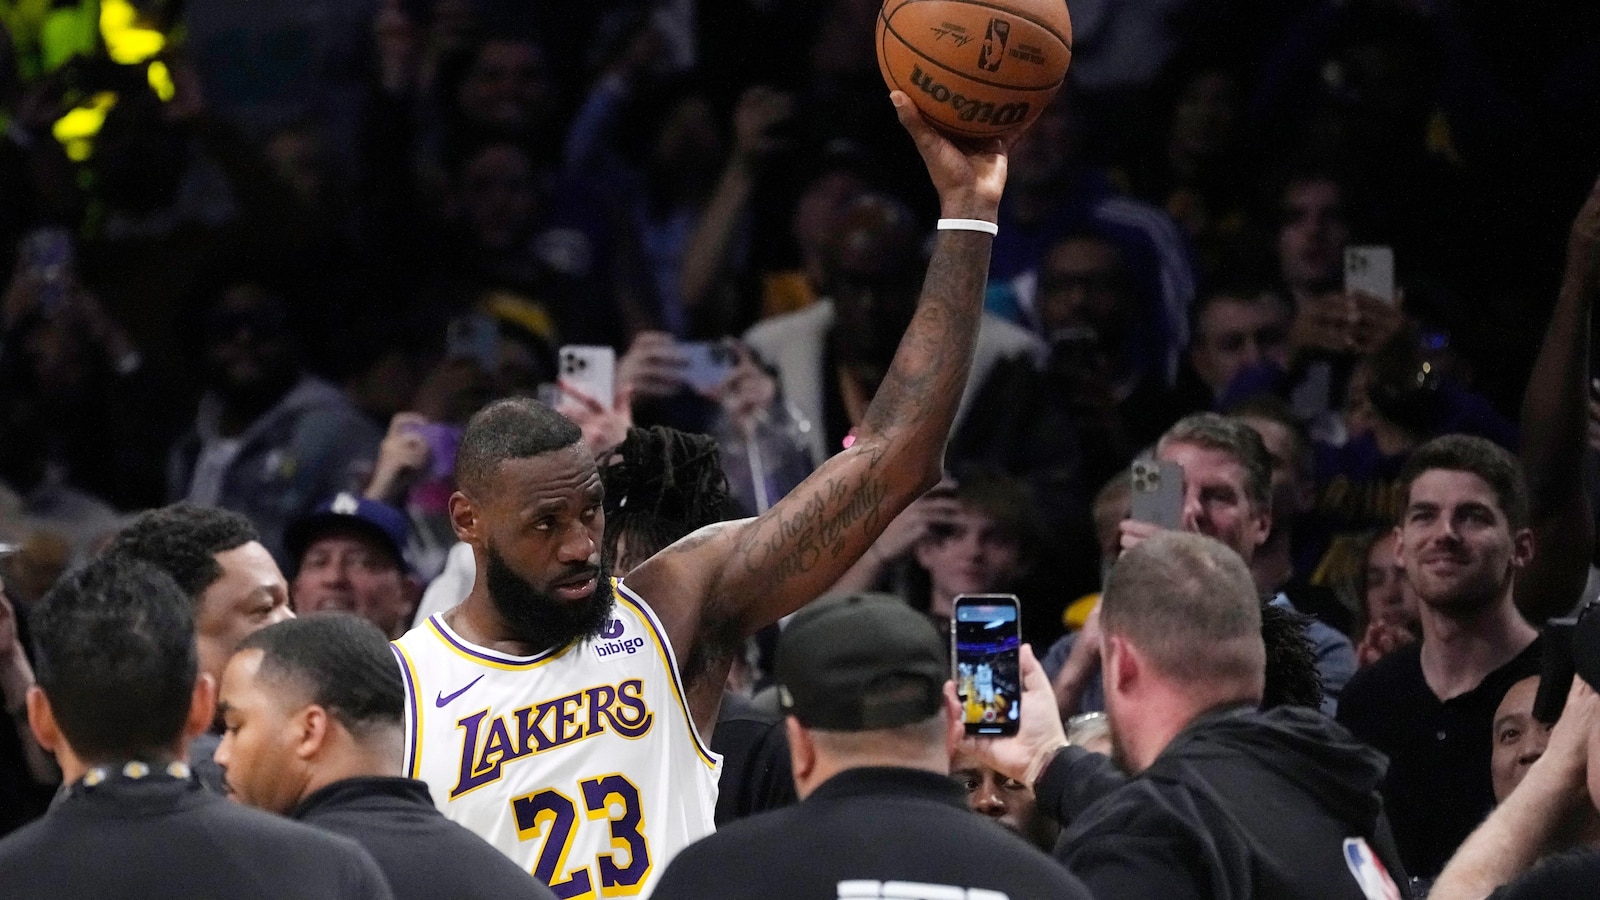 LeBron James Sets New NBA Scoring Record with 40,000 Points